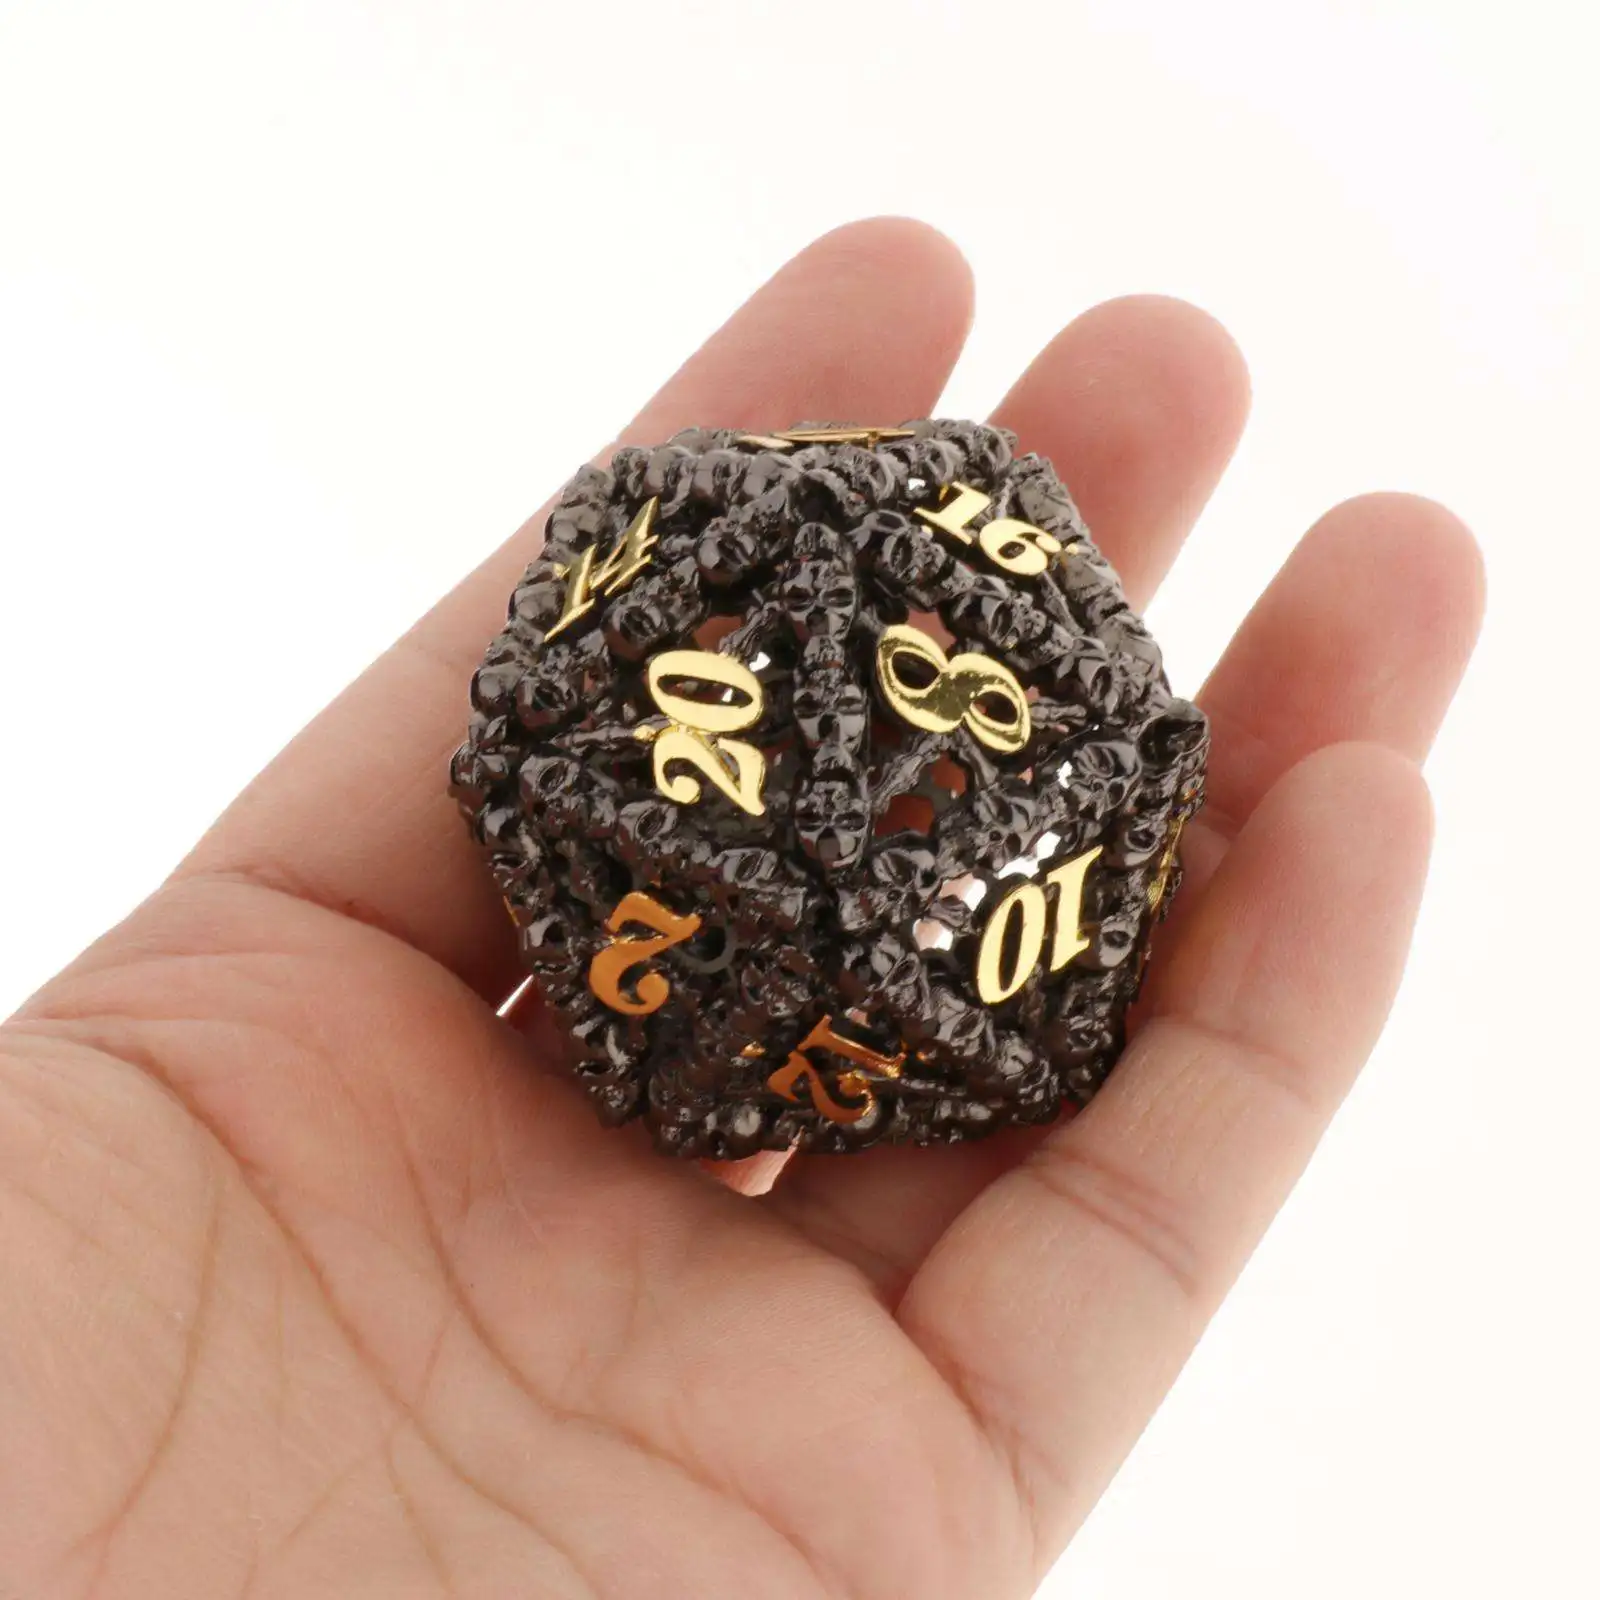 Creative Skull Dice D20 Hollow DND Polyhedral Dice Parties DND Dice D&D Tabletop Game Hollow Dice